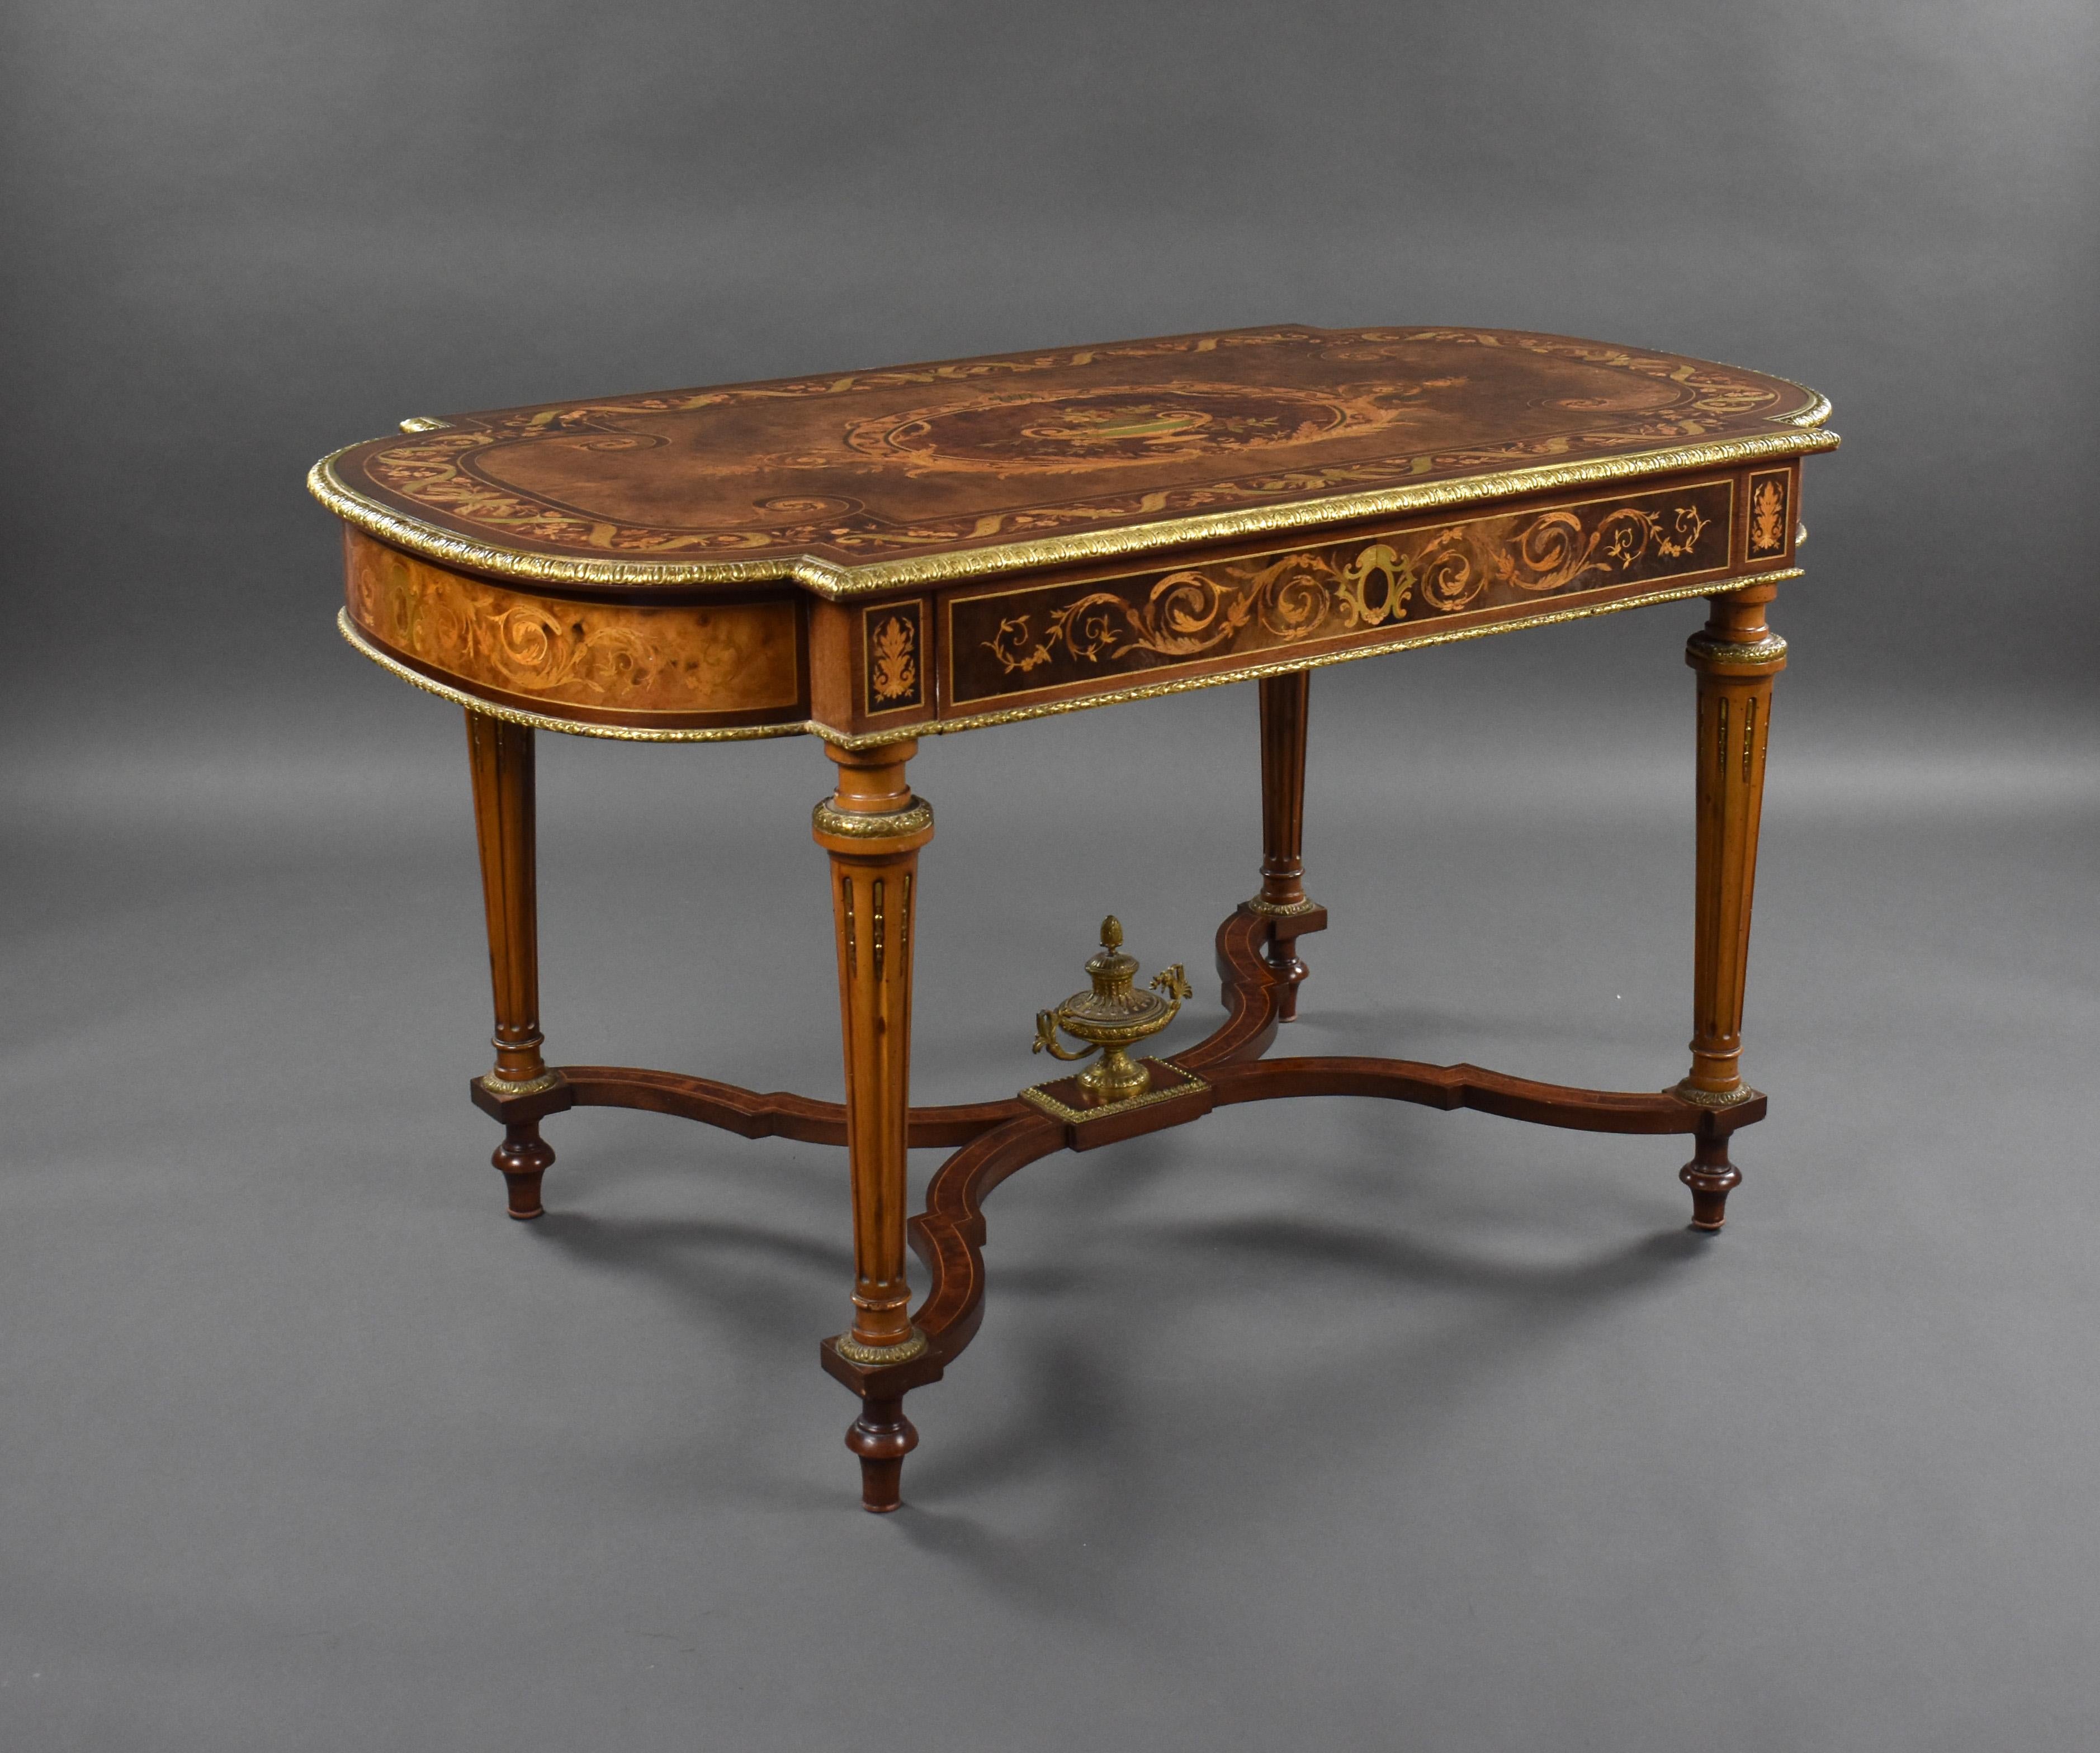 For sale is a fine quality 19th century French marquetry centre table, the top vneered and profusely inlayed with burr walnut, burr yew, amaranth, birds eye maple and stained sycamore. Decorated throughout with gilt metal mounts. The table remains